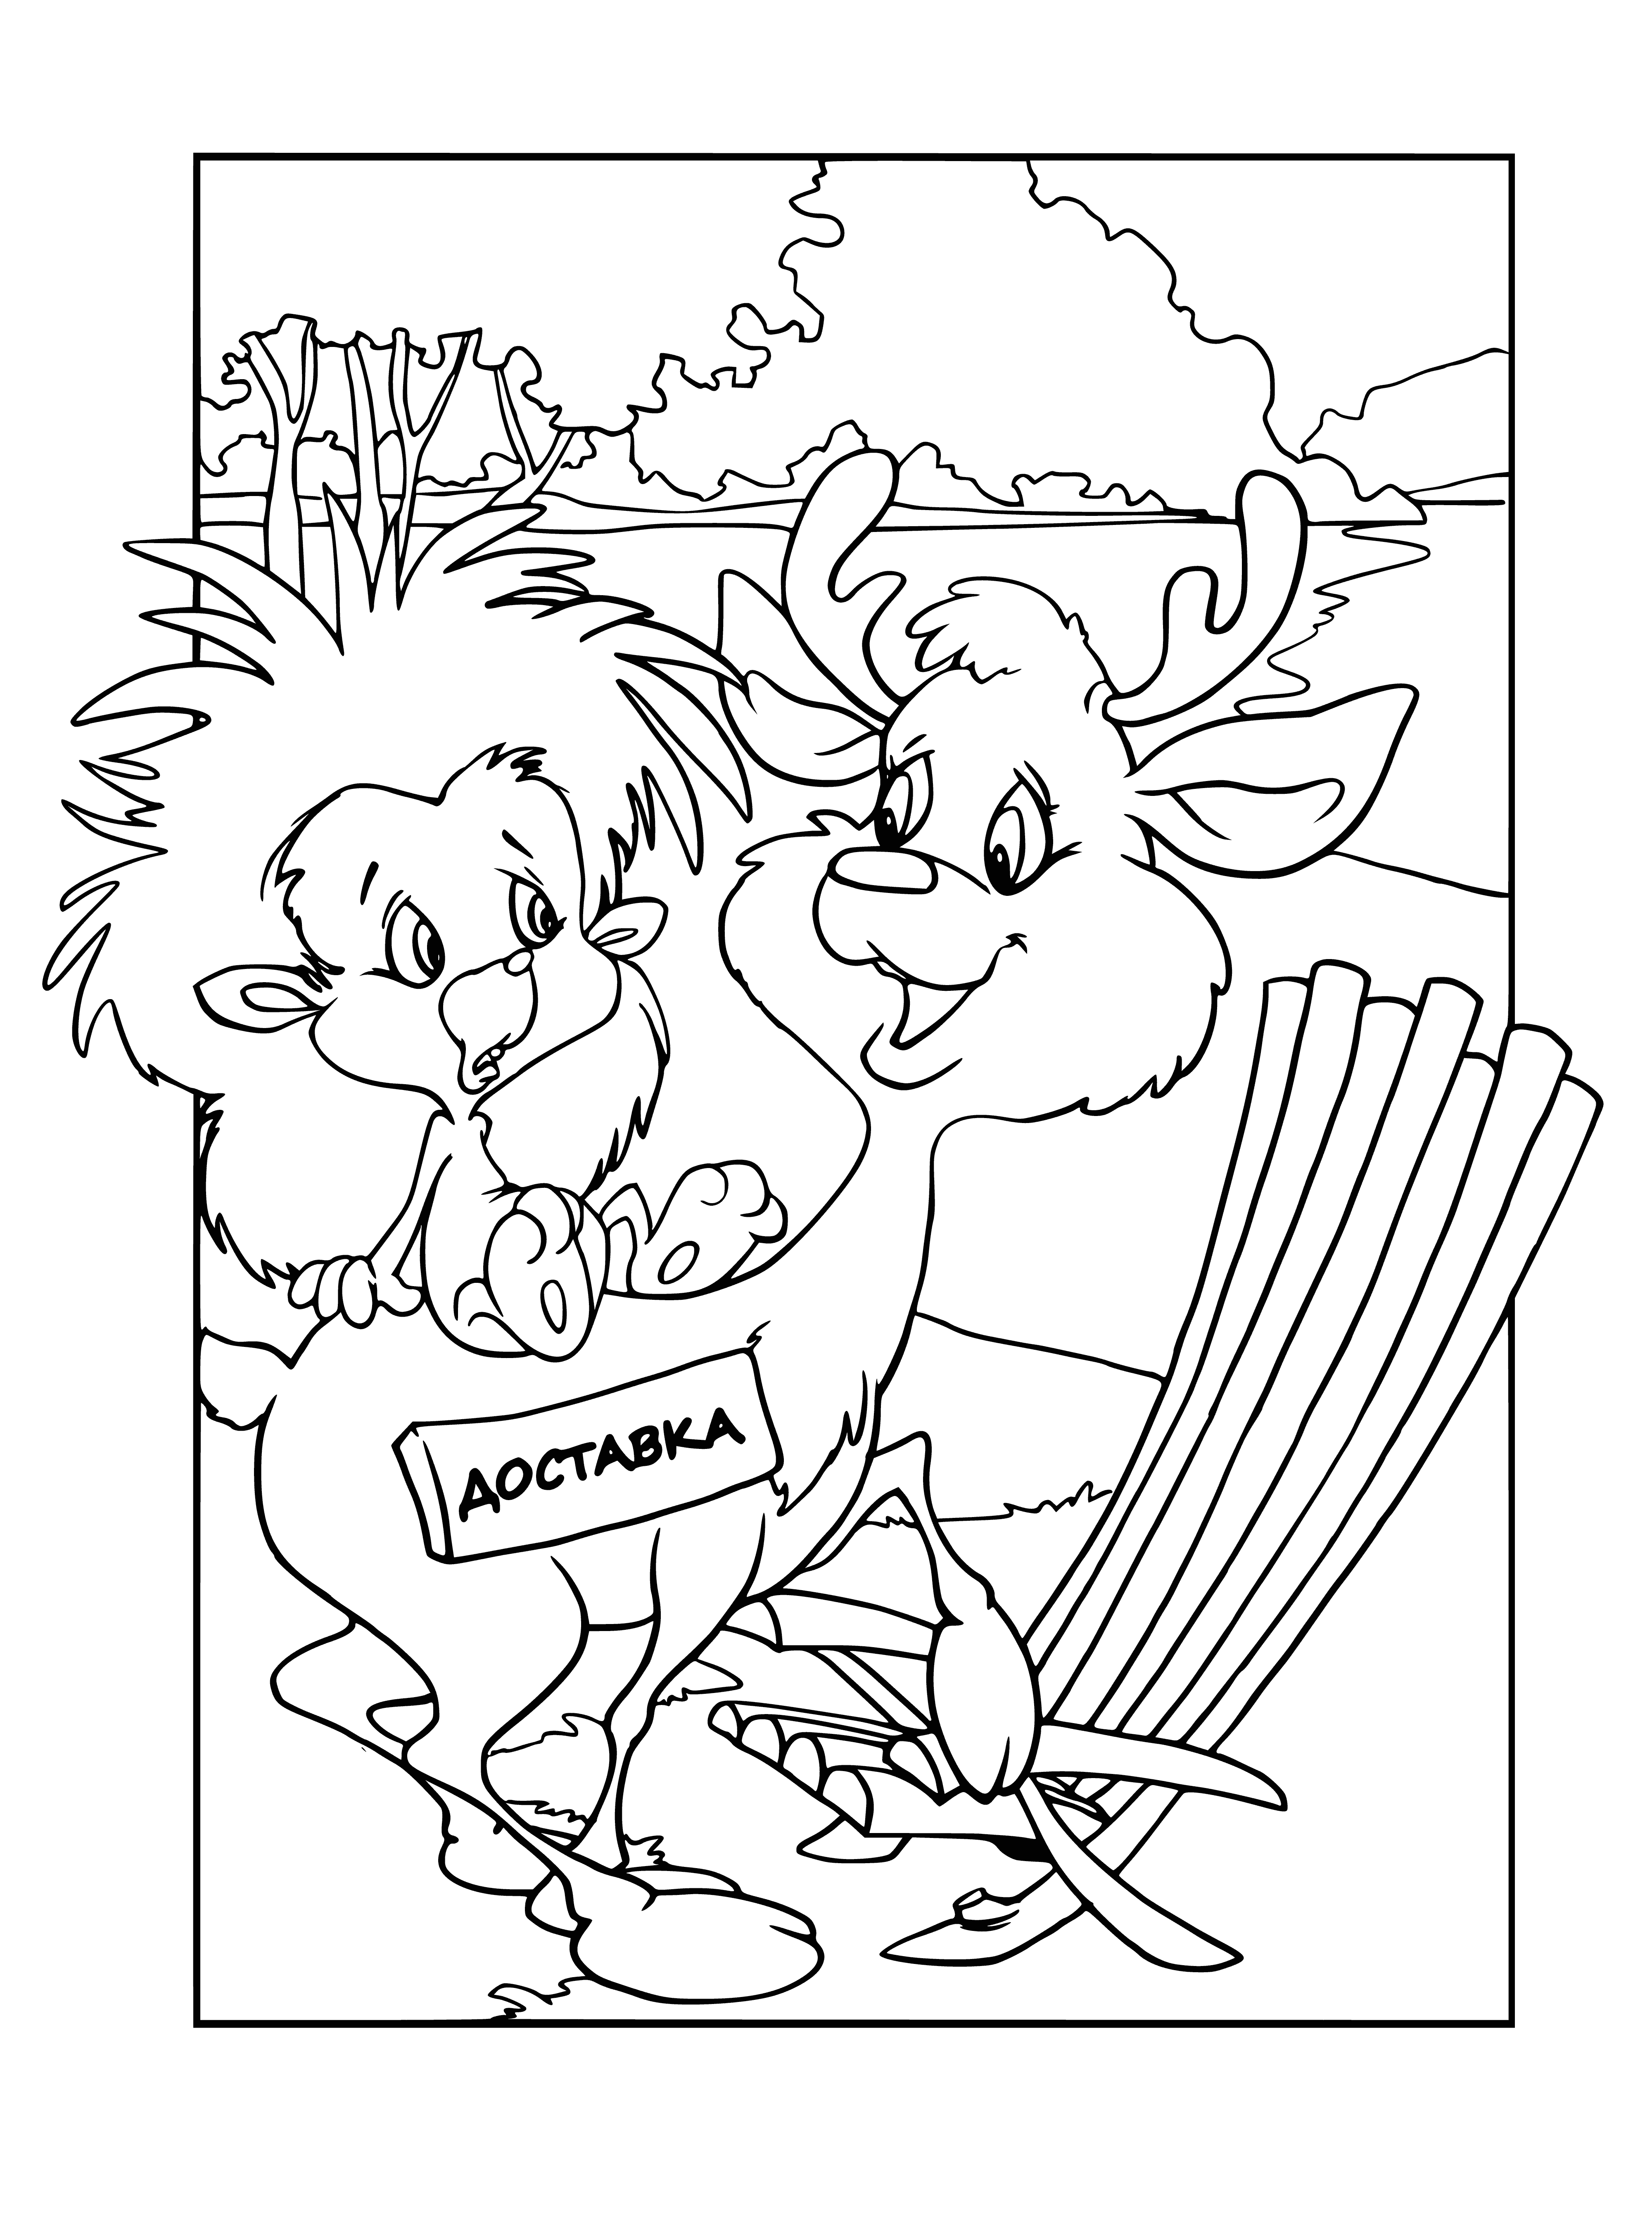 coloring page: Friends playing with ball, one holds it and one runs to catch it. Oreshenka watches from behind.